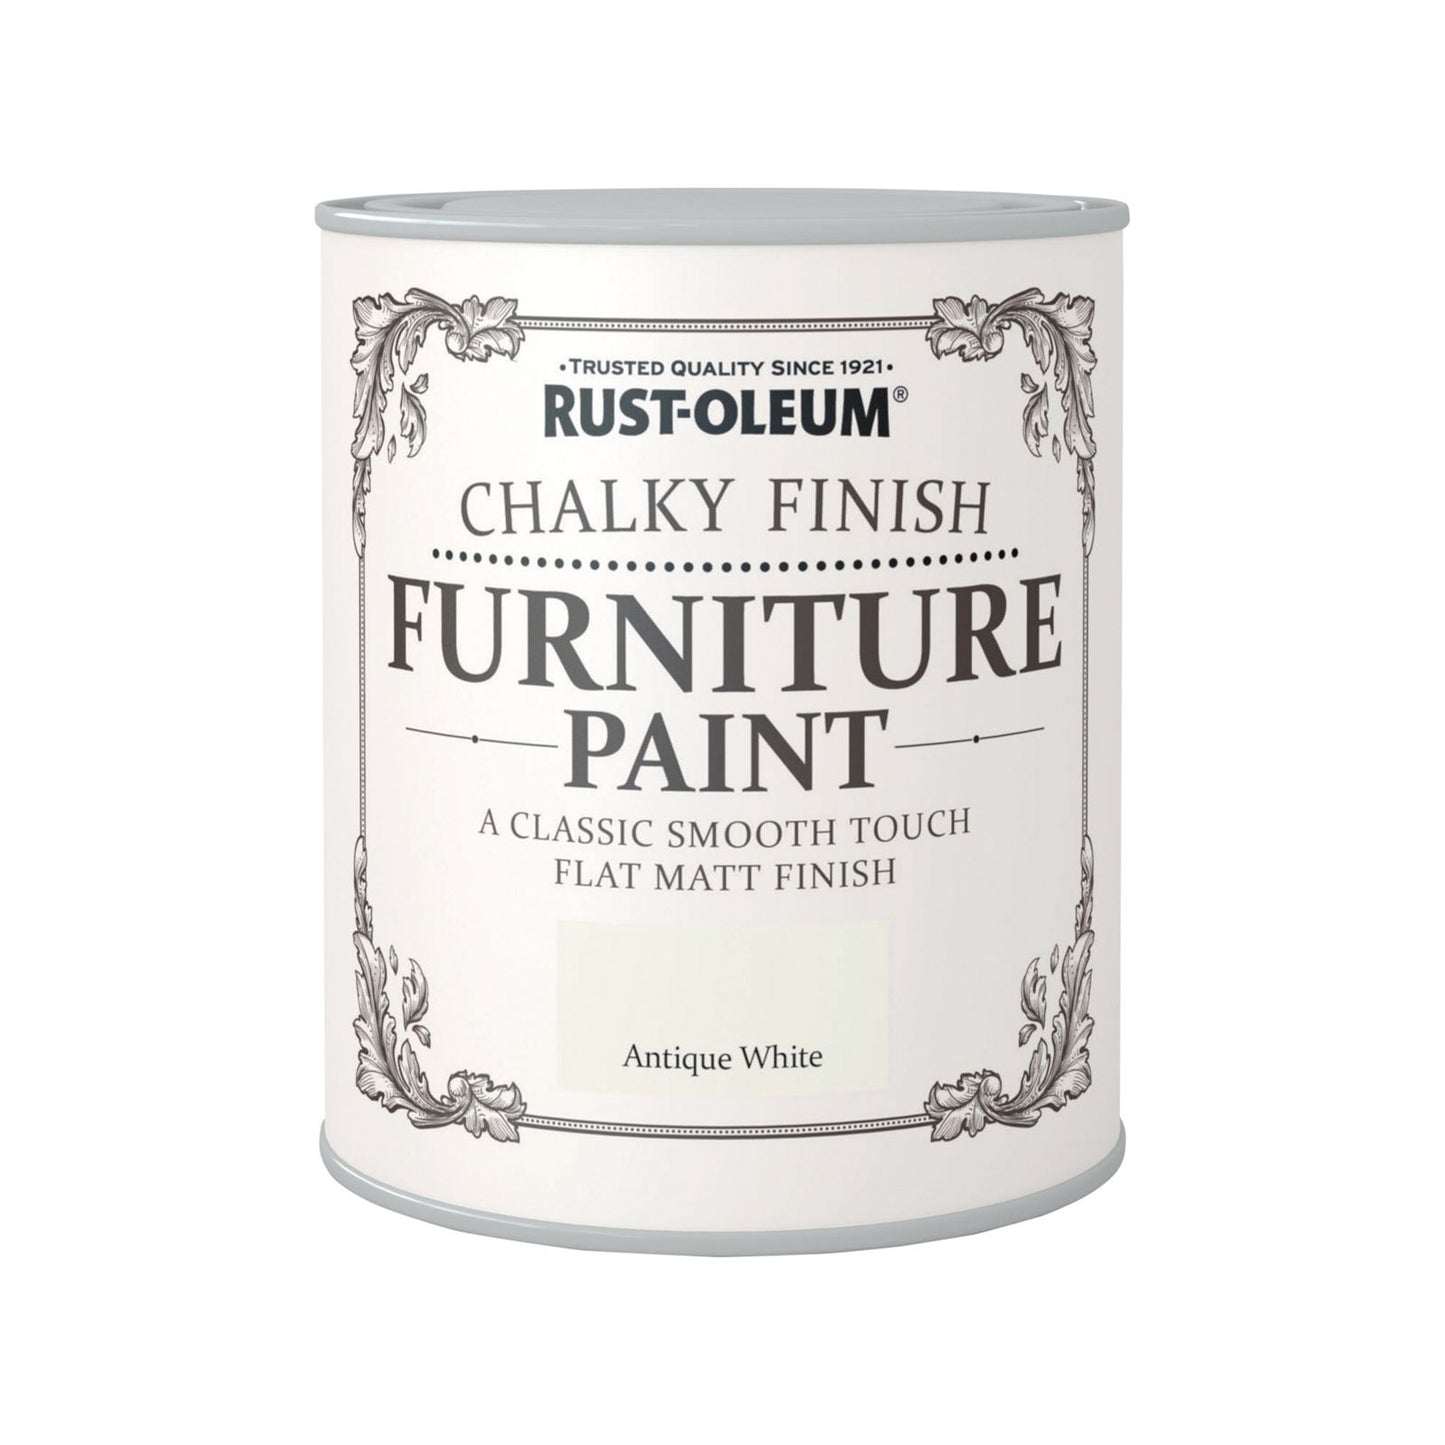 Rust-Oleum Chalky Finish Furniture Paint Antique White